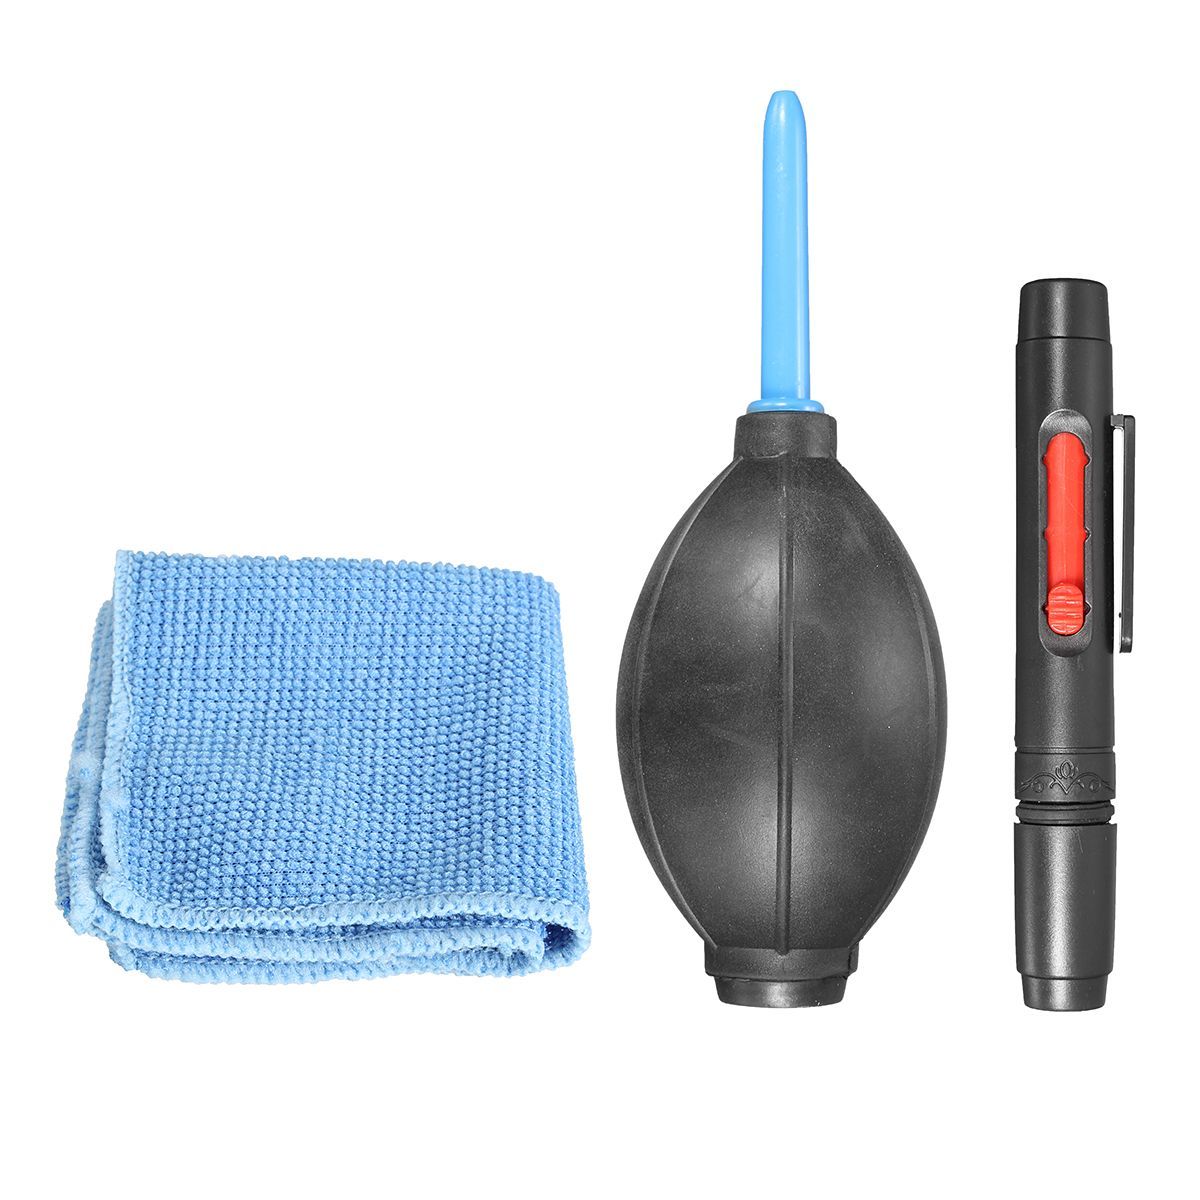 WOLFGANG-3-in-1-Set-Digital-Camera-Cleaning-Brush-Photography-Professional-Cleaner-Air-Blower-1428063